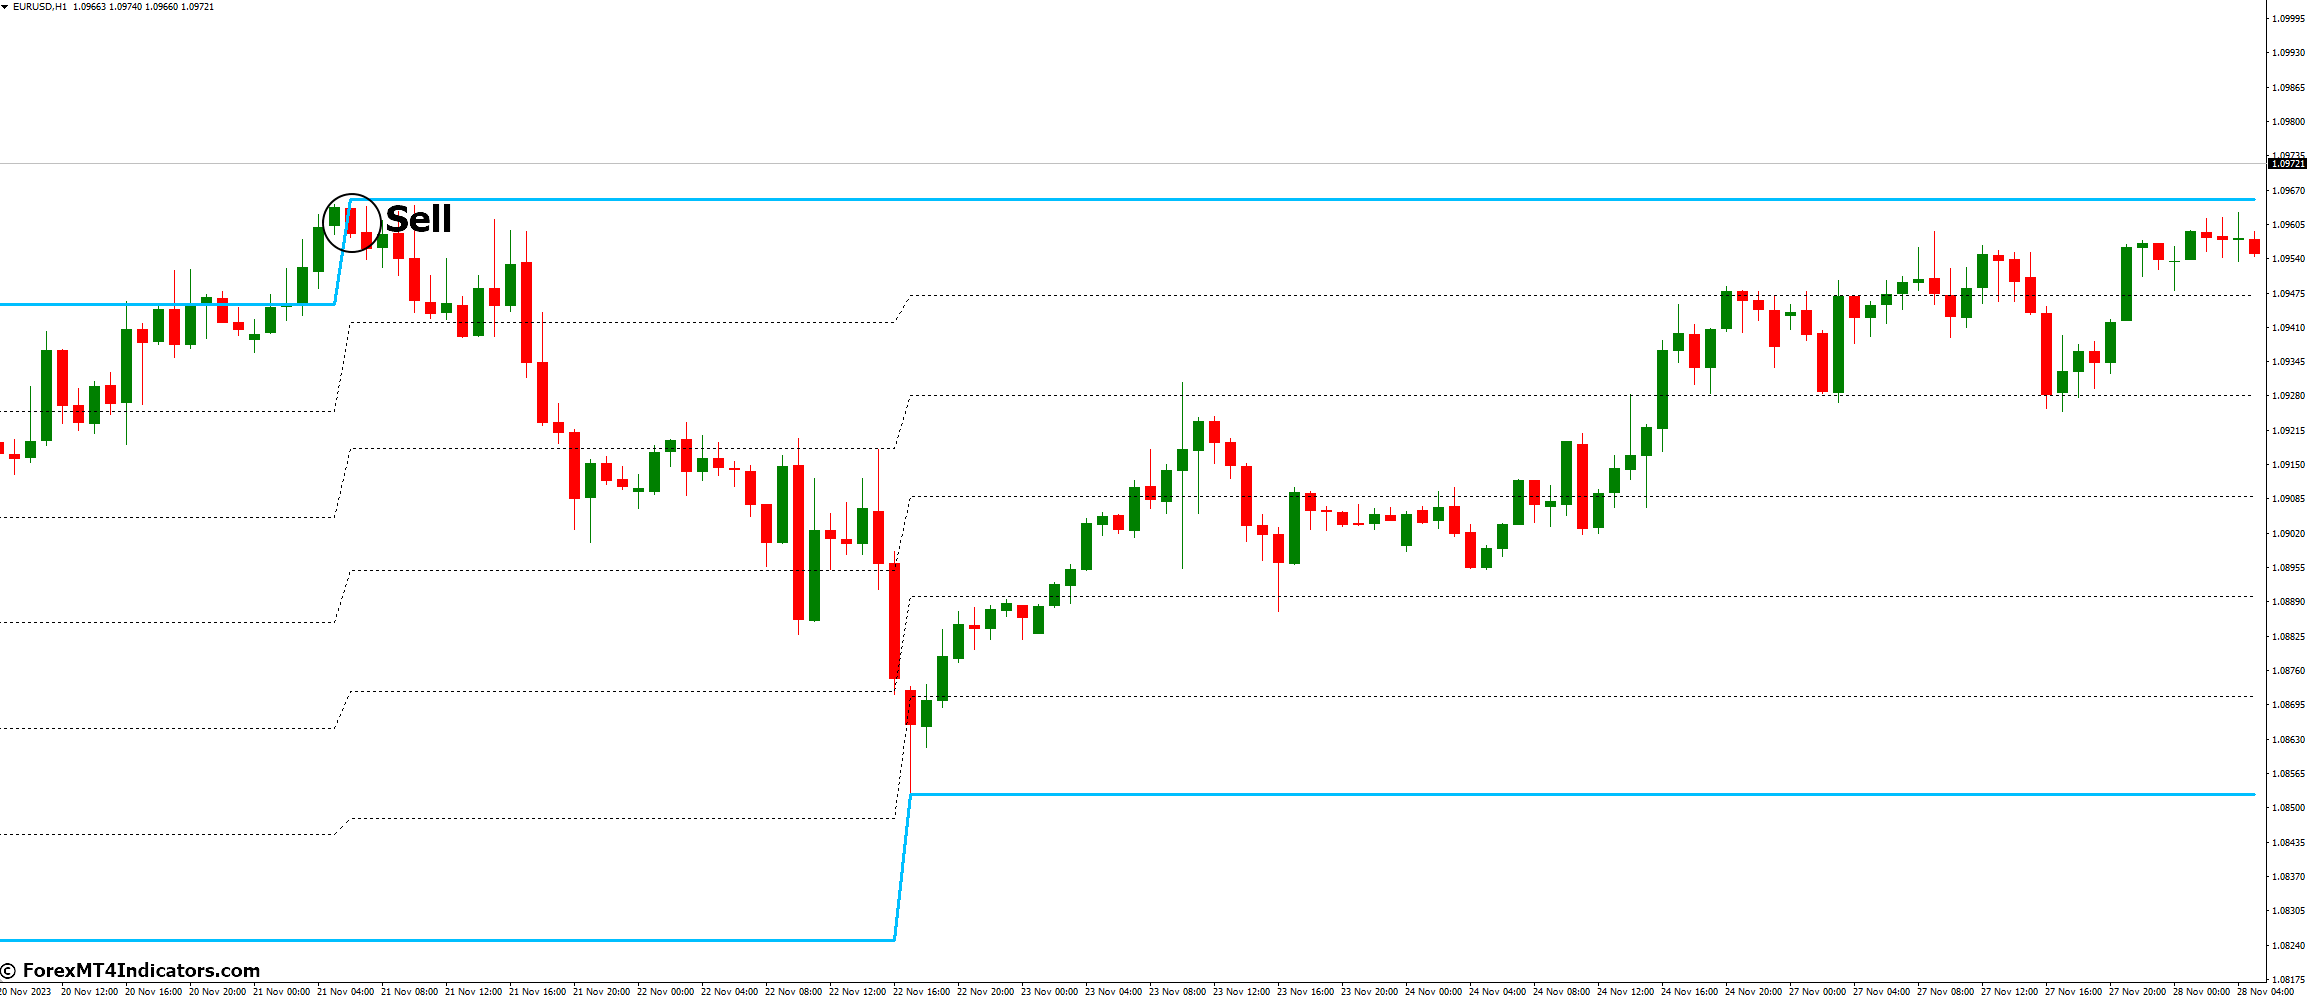 How to Trade with Trade Channel Indicator - Sell entry